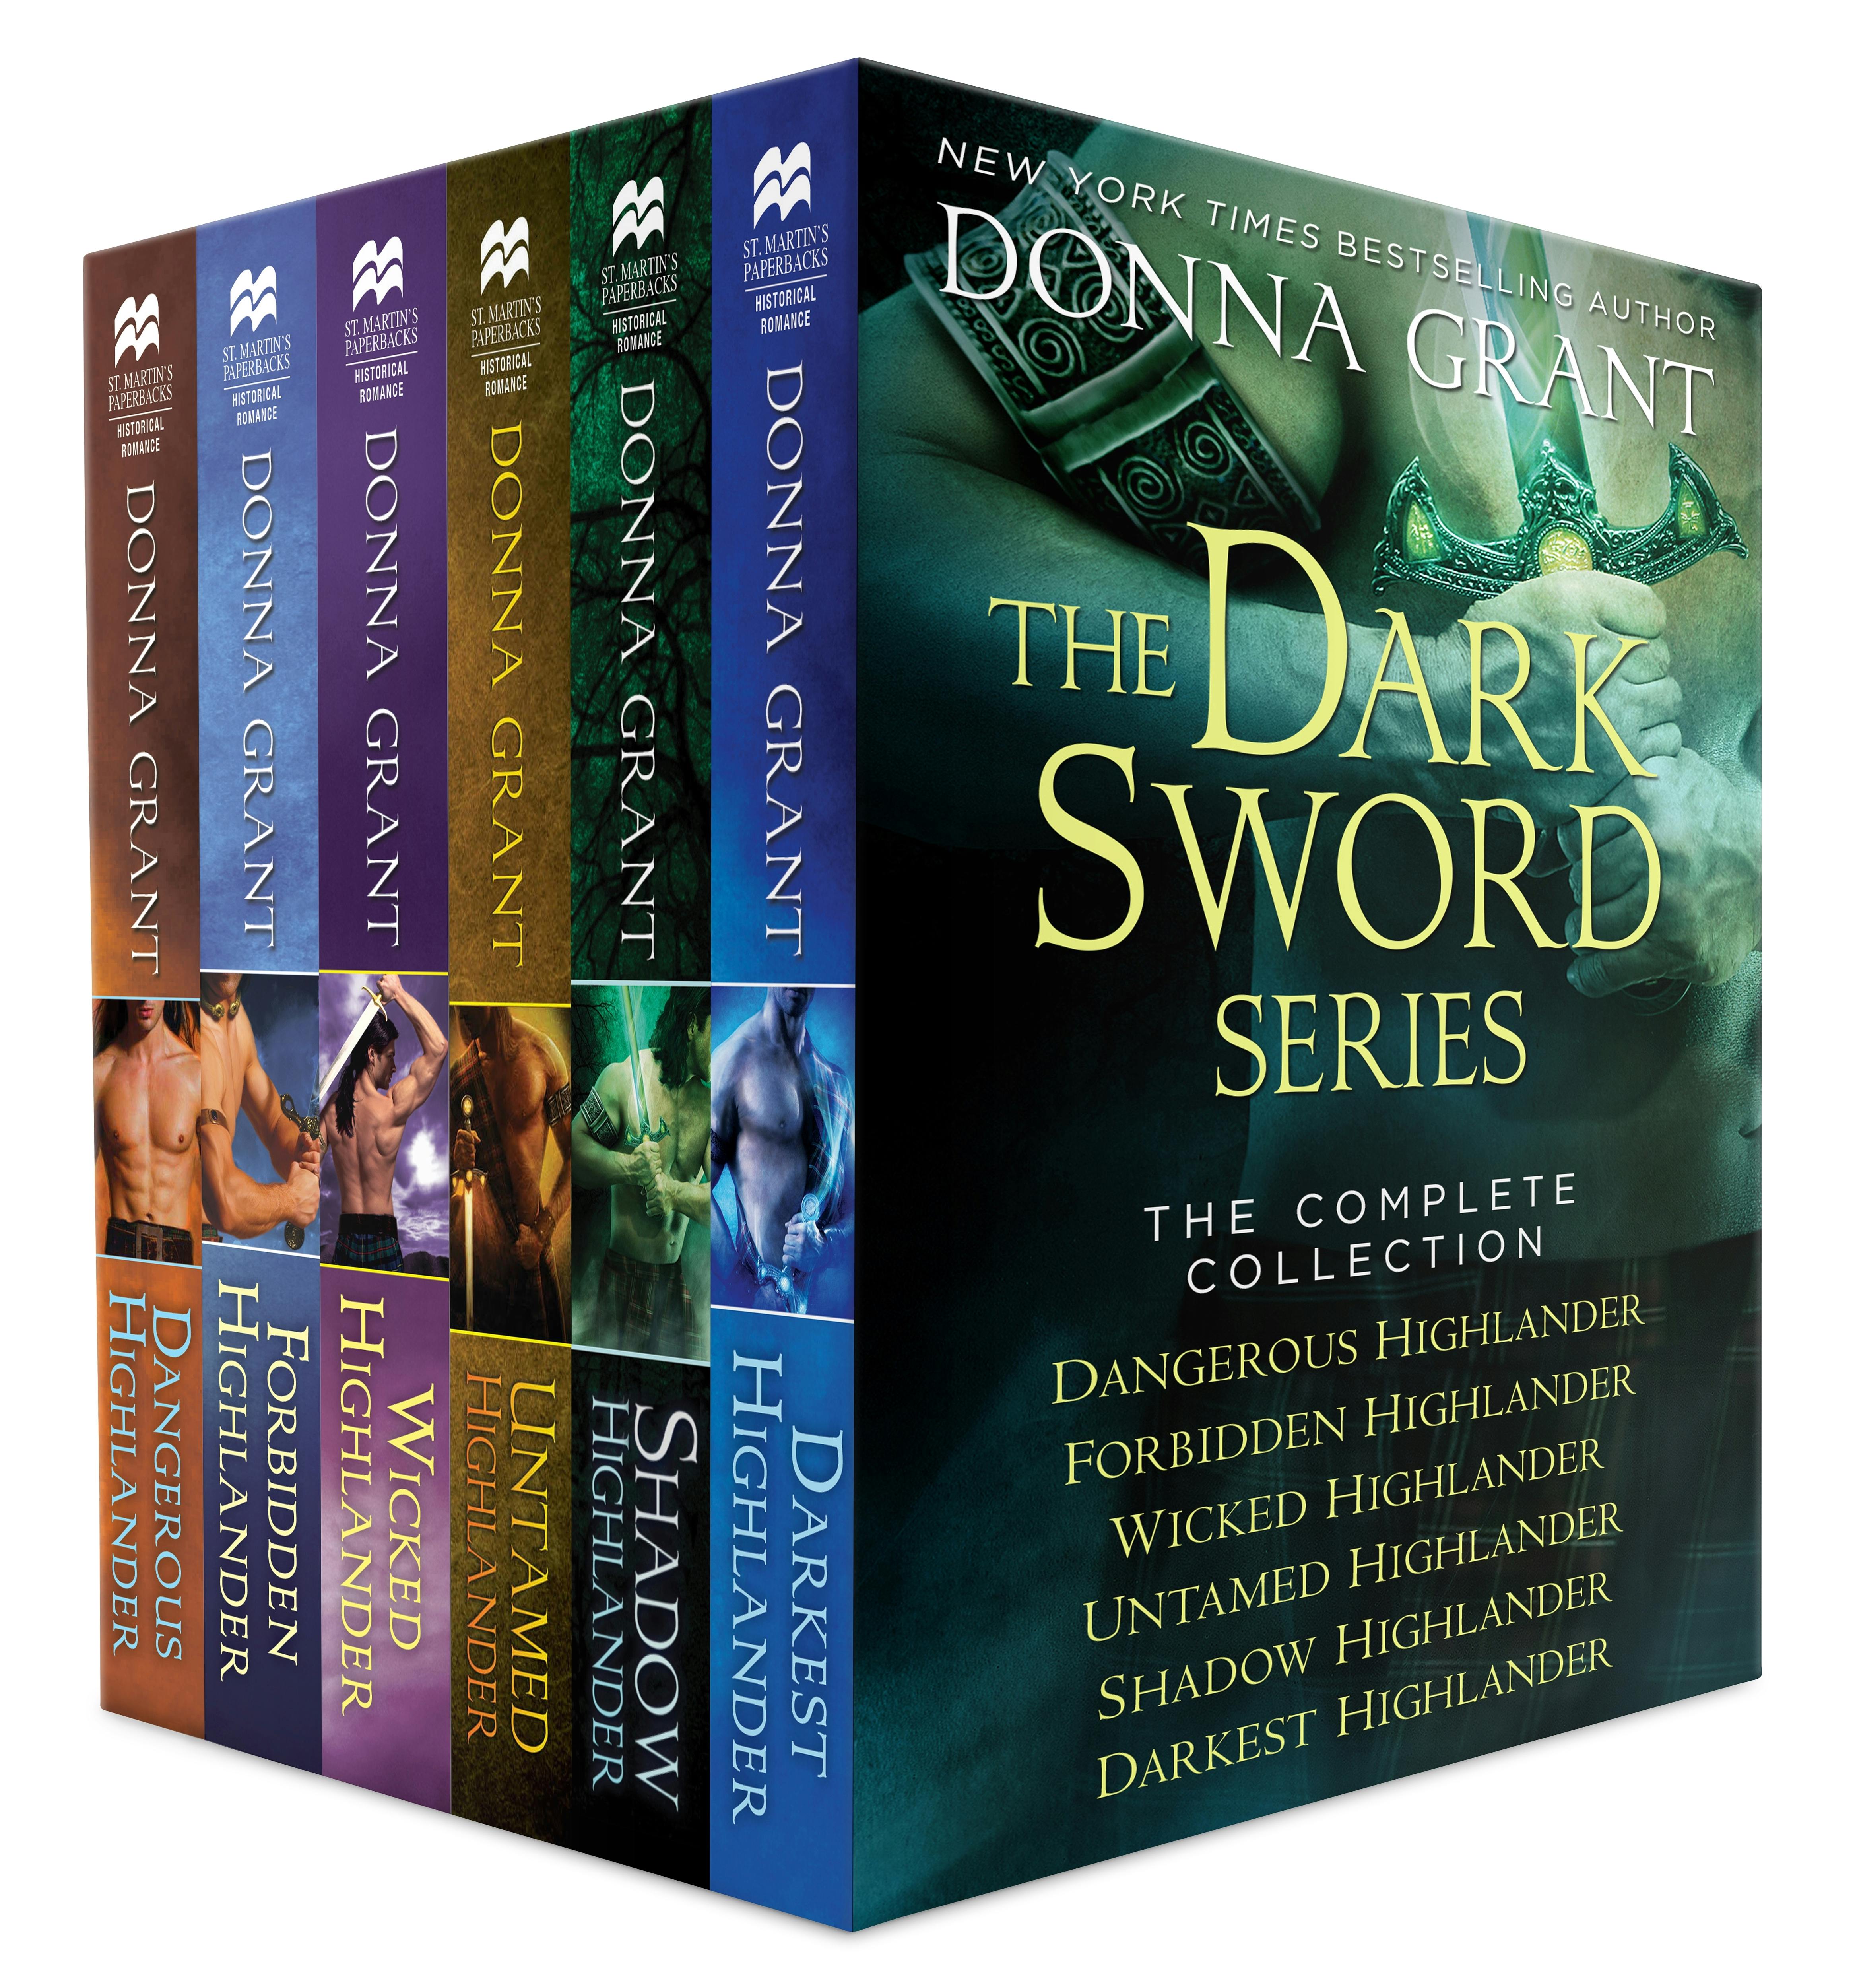 Image of The Dark Sword Series, The Complete Collection